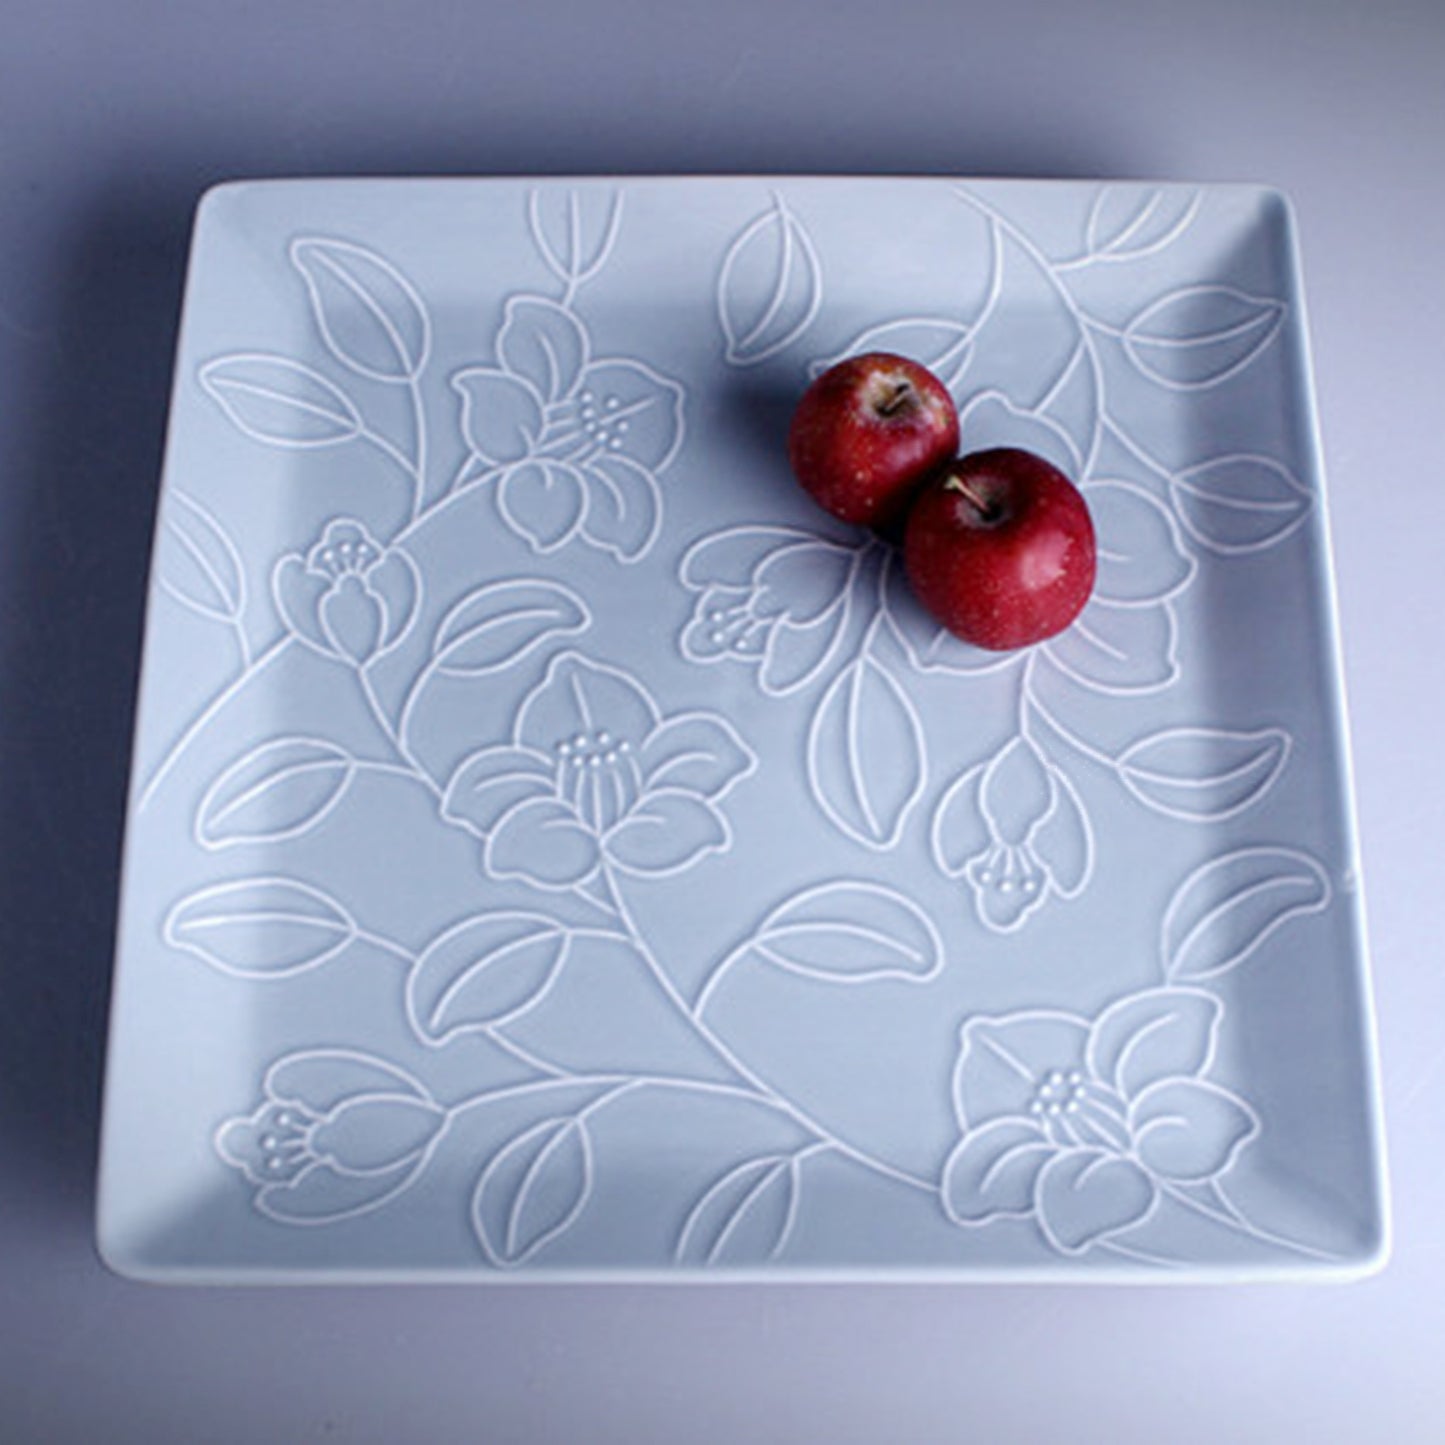 Refreshing Square Dinner/Sharing Plate 280mm (Sky Blue Color) 𝟭 𝗣𝗹𝘂𝘀 𝟭